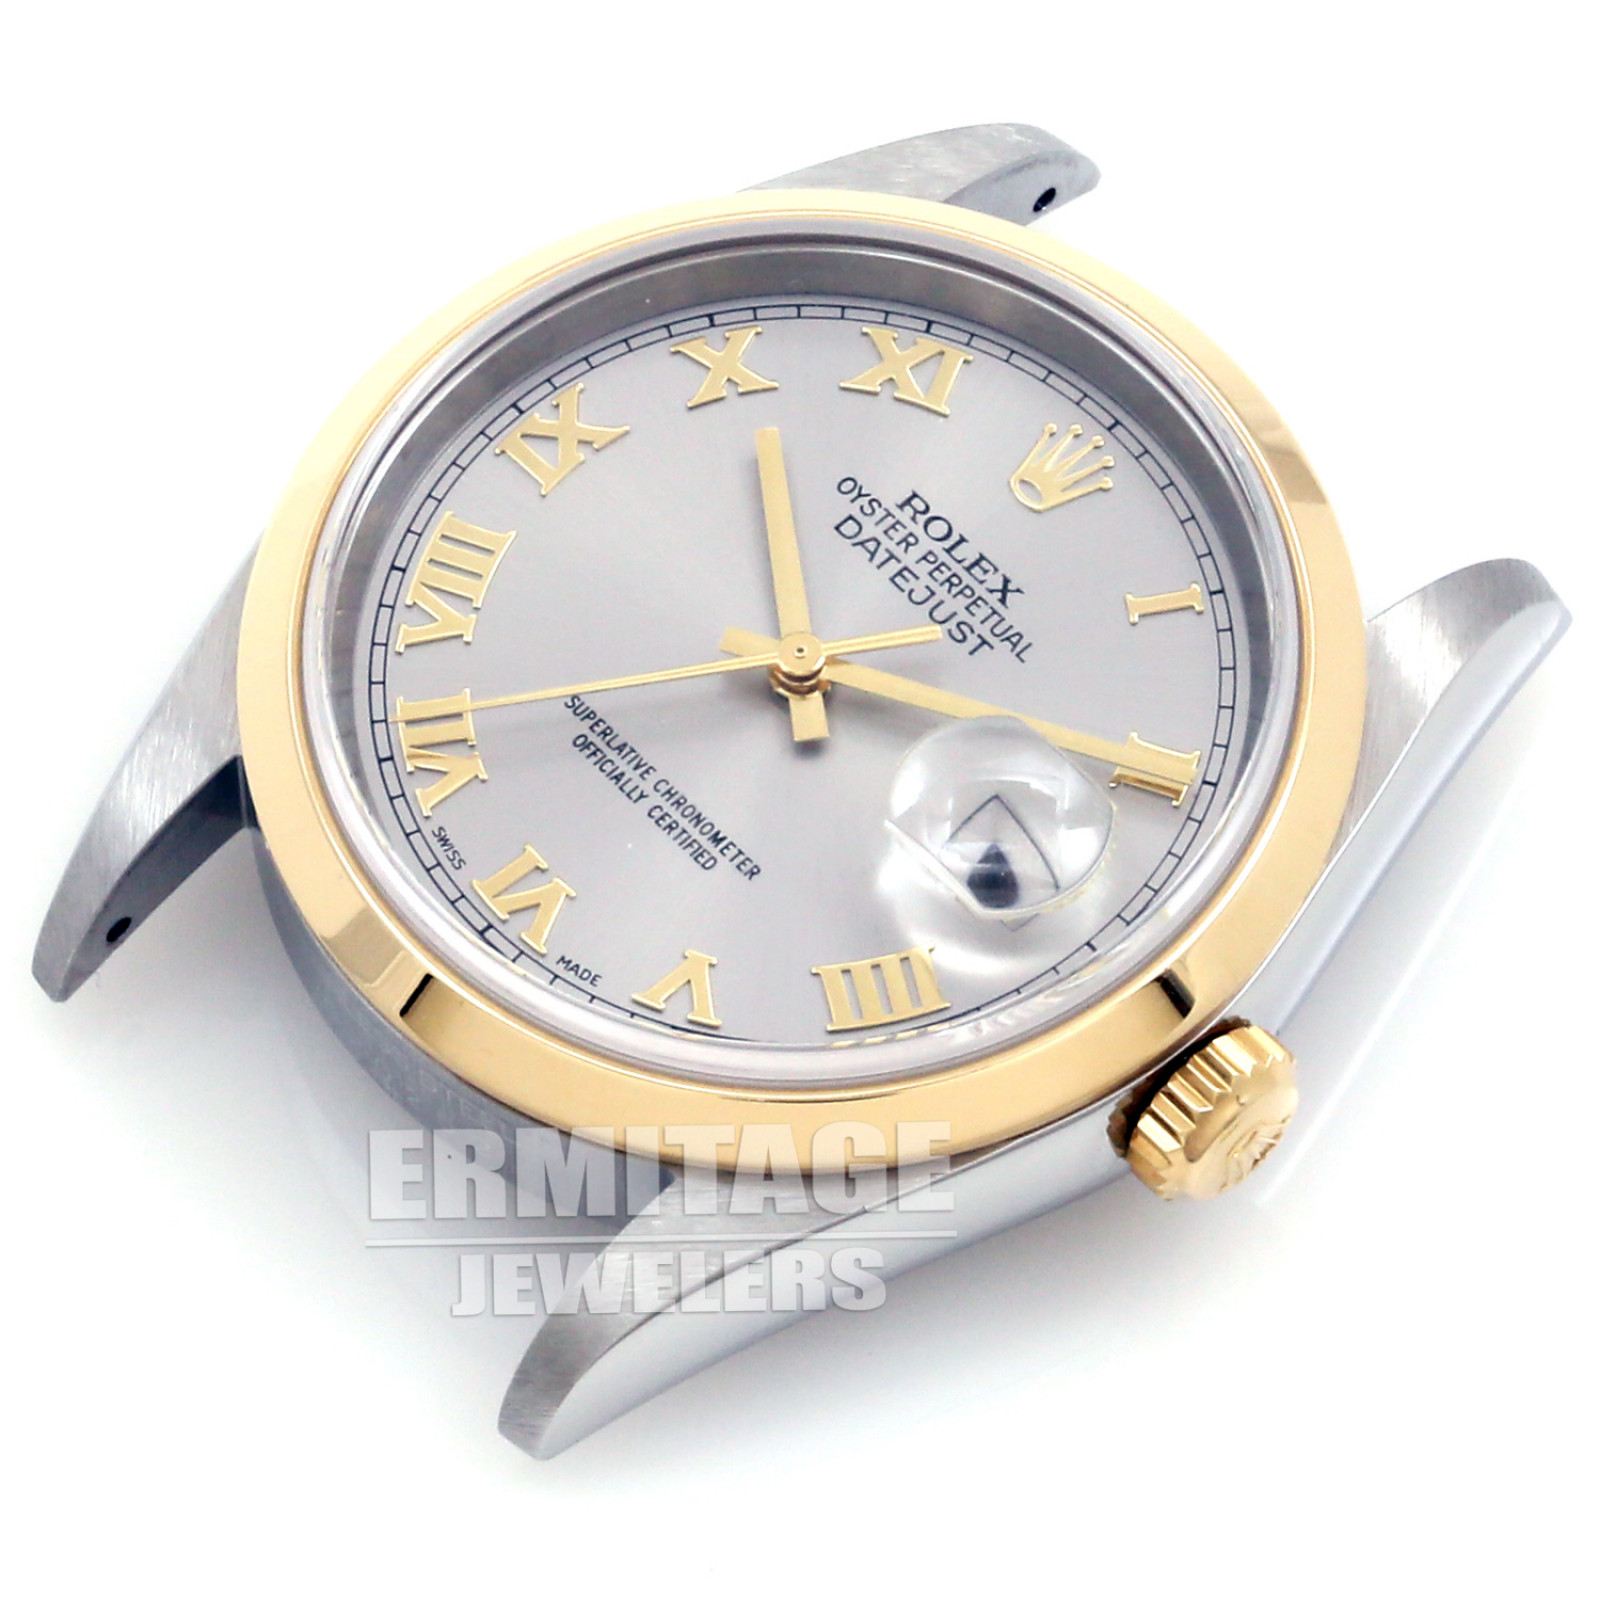 Gold & Steel on Oyster Rolex Datejust 16203 36 mm